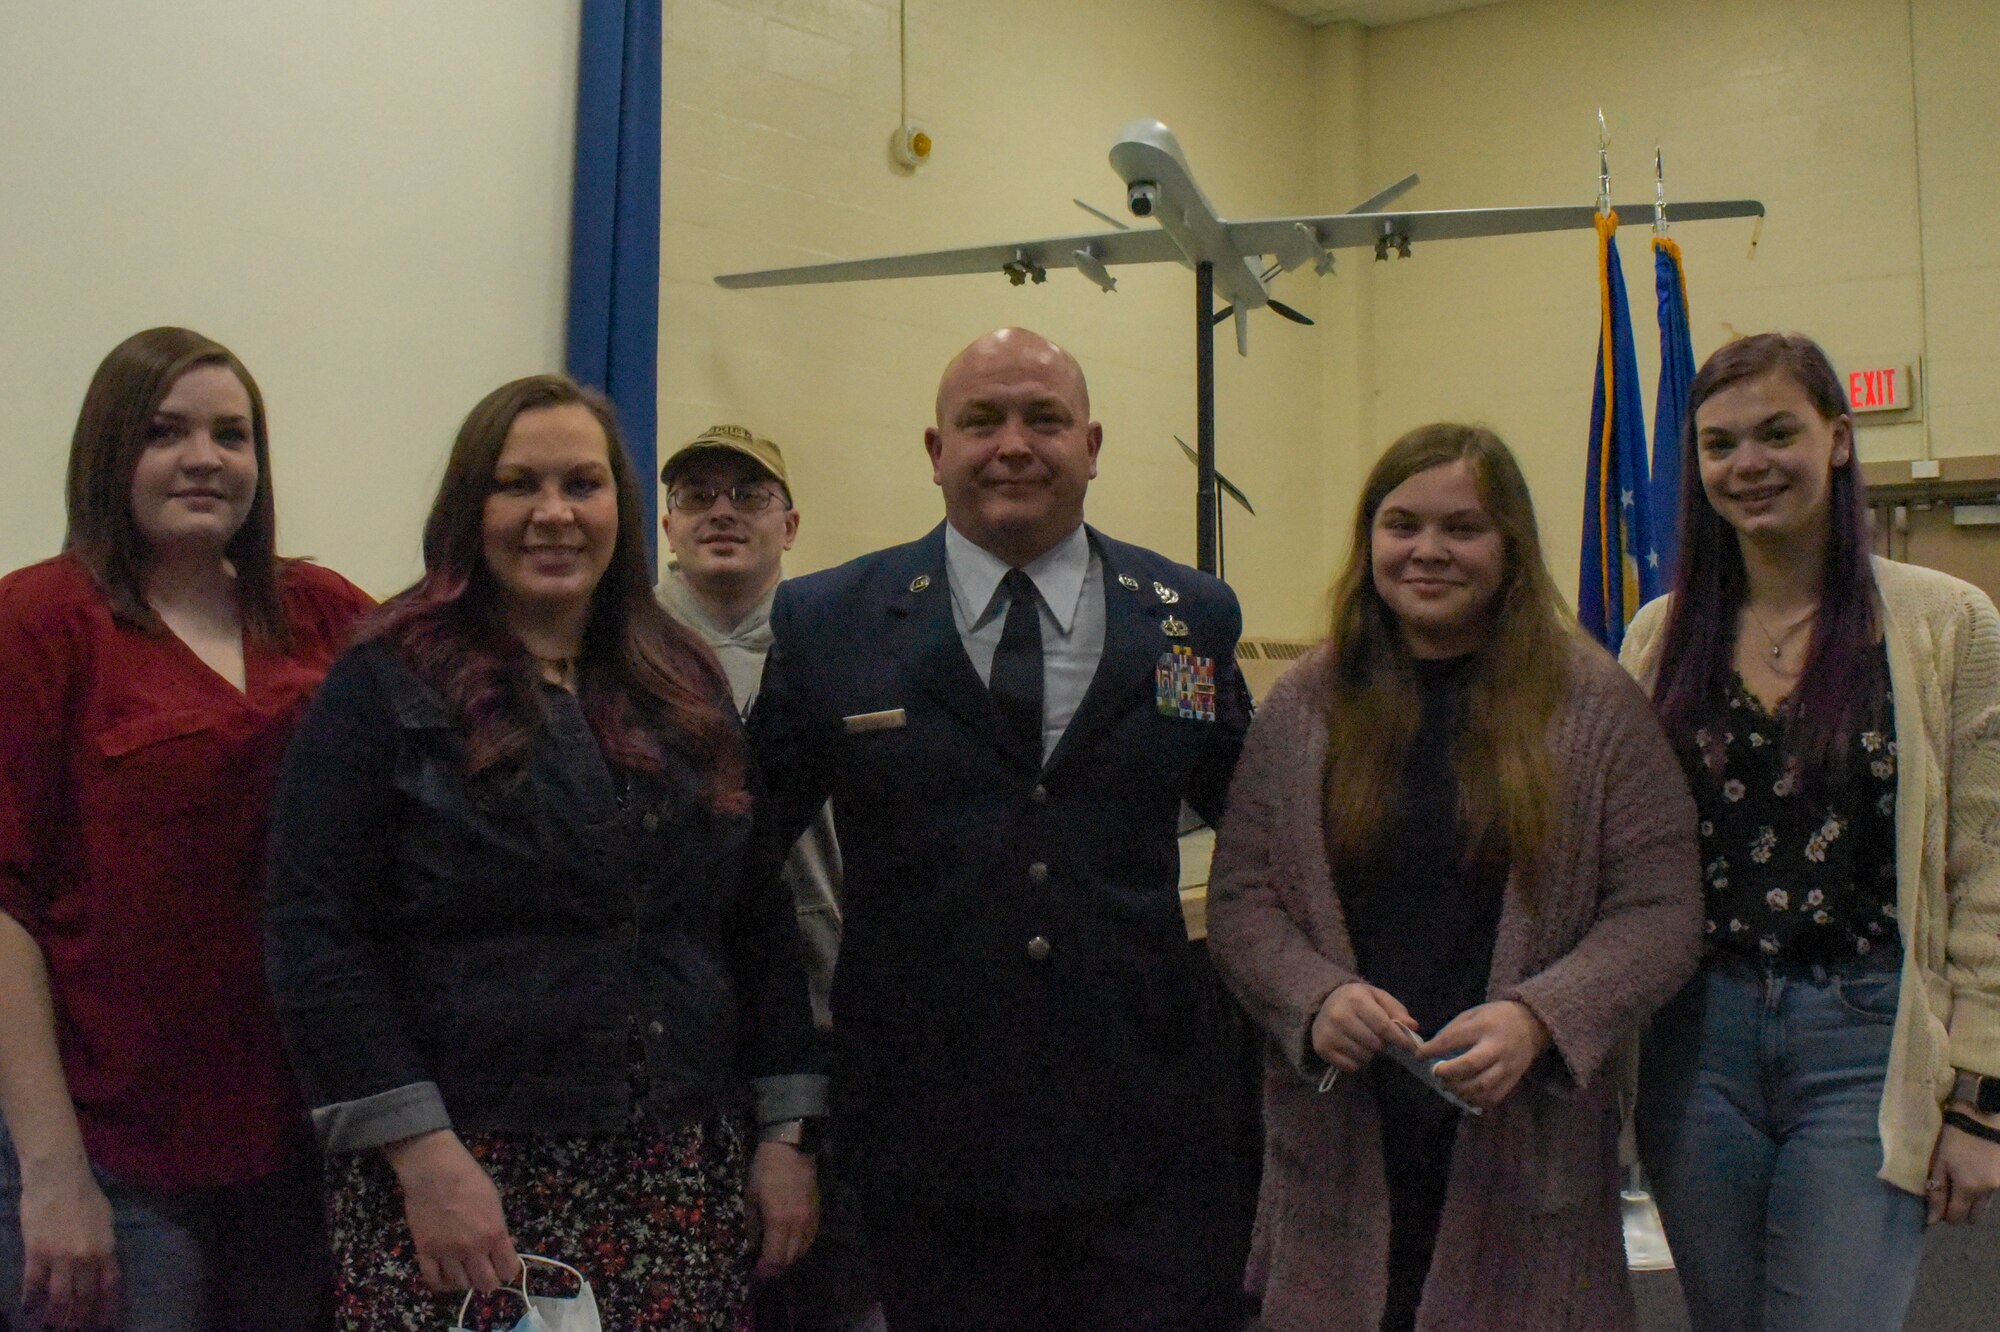 A man in Air Force dress blue uniform poses for a photo with his family; his wife, three young women and a young man.